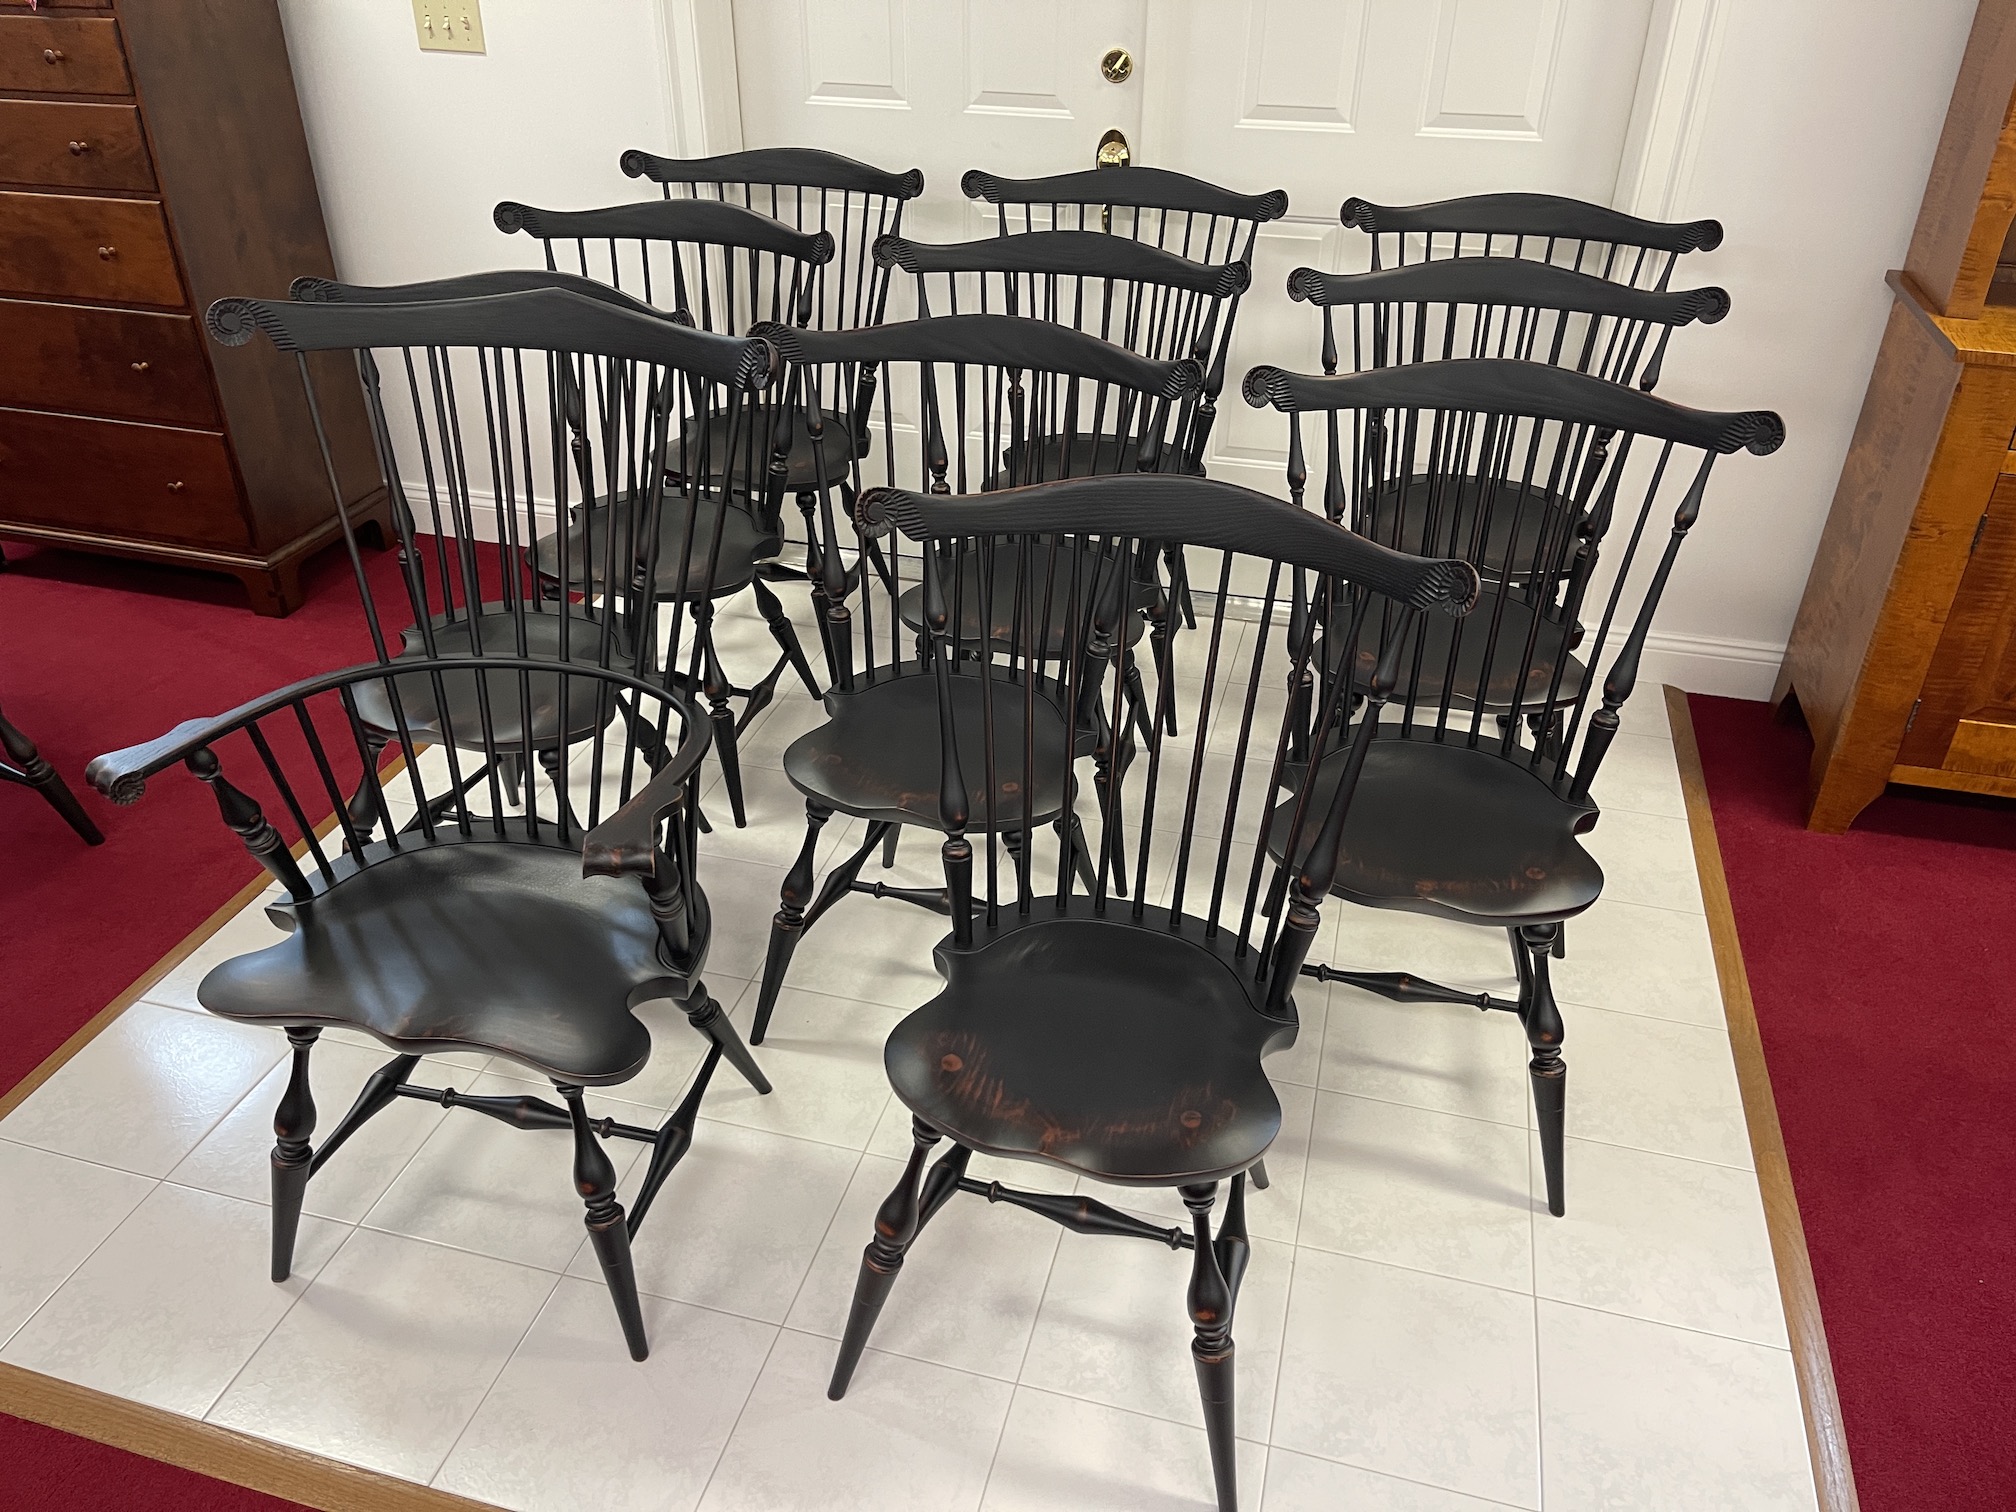 Set of 11 Windsor Chairs in Antique Black over Red Crackle Finish Image